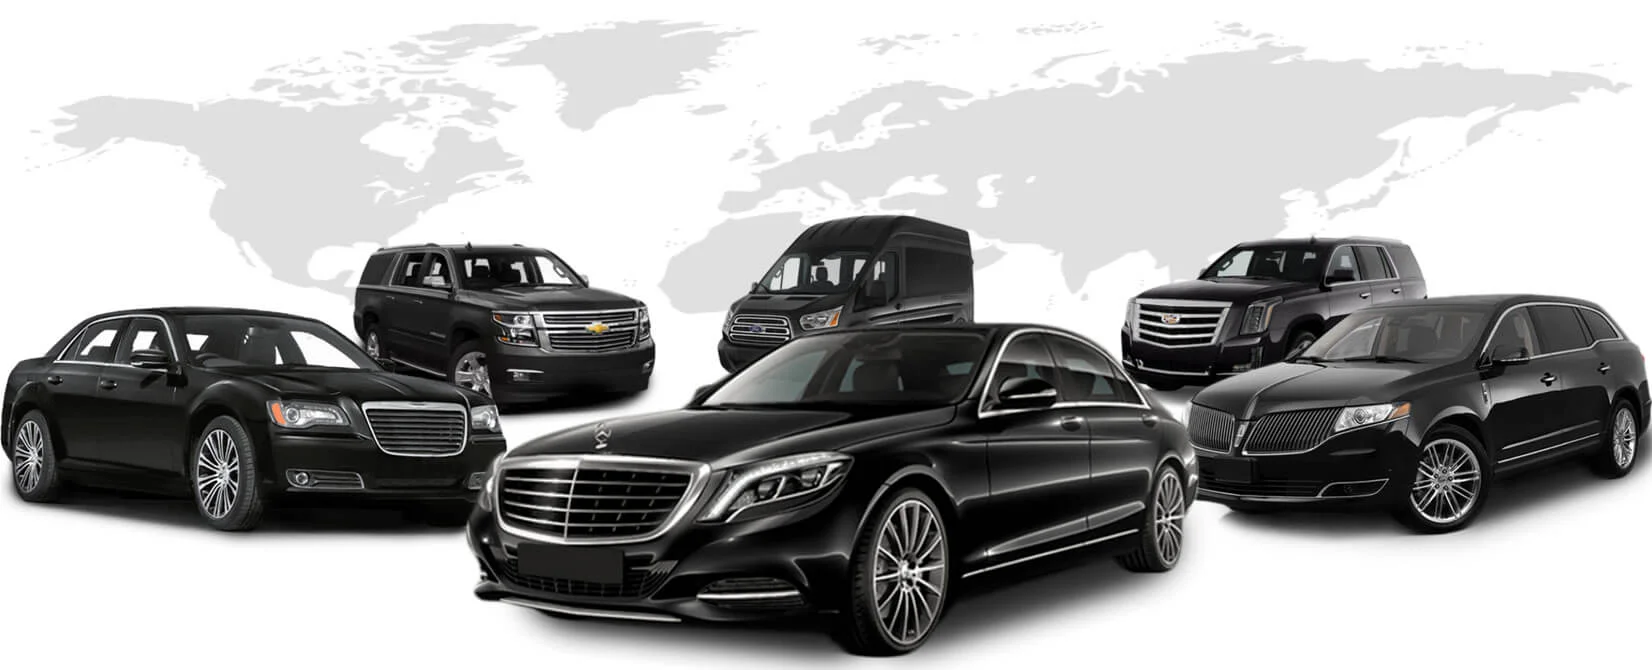 Various black cars on a map background